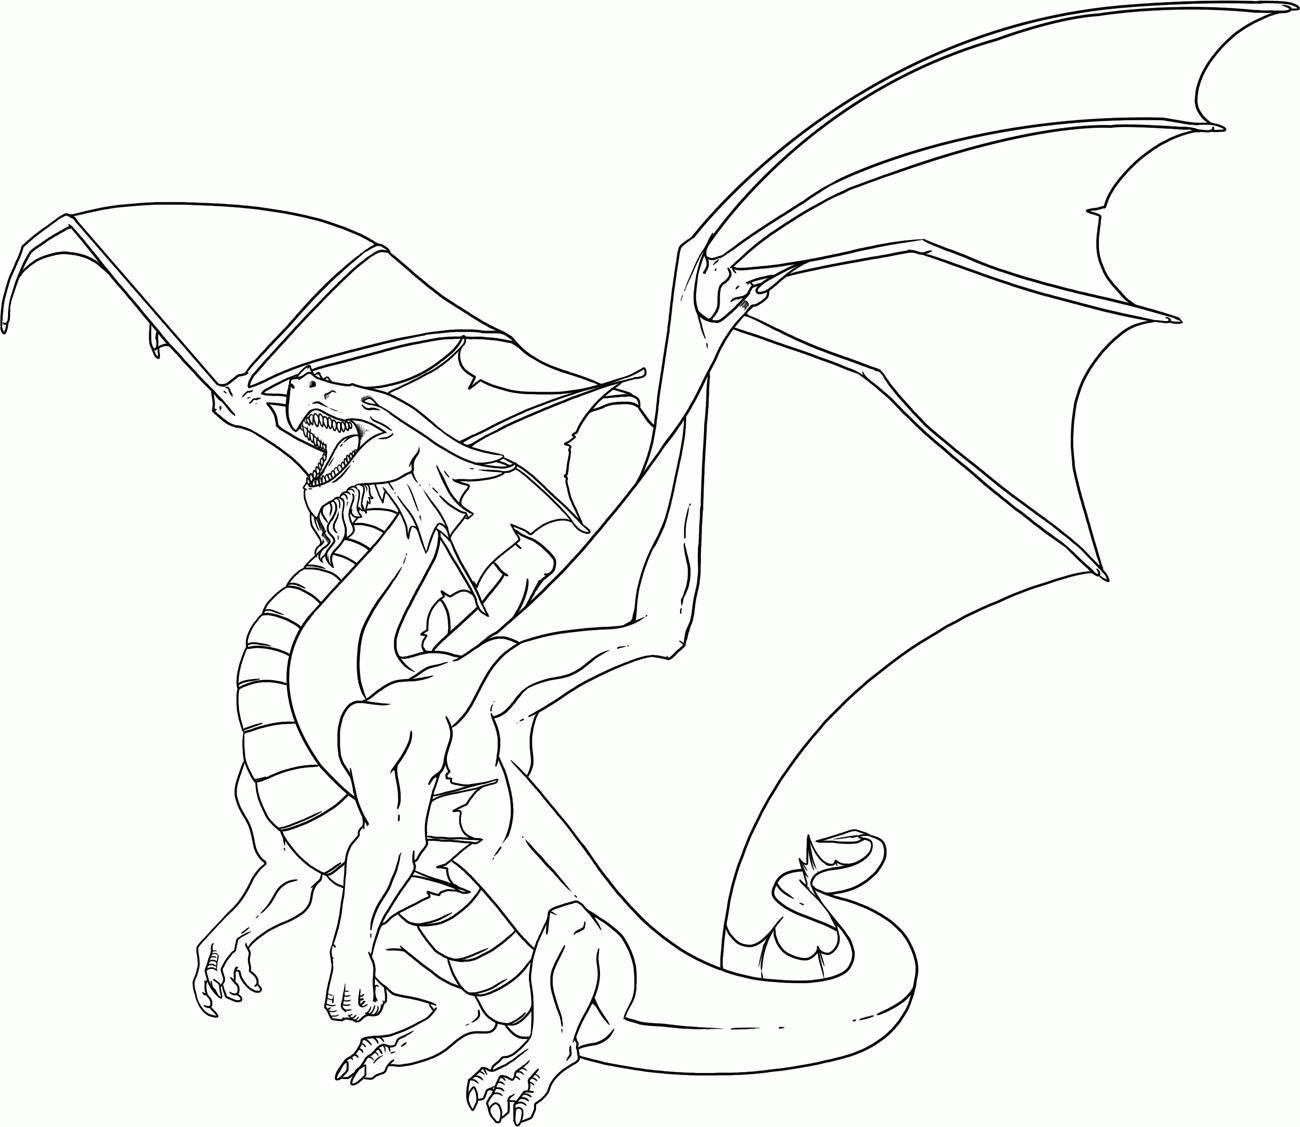 Free Fire Breathing Dragon Coloring Pages, Download Free Fire ...